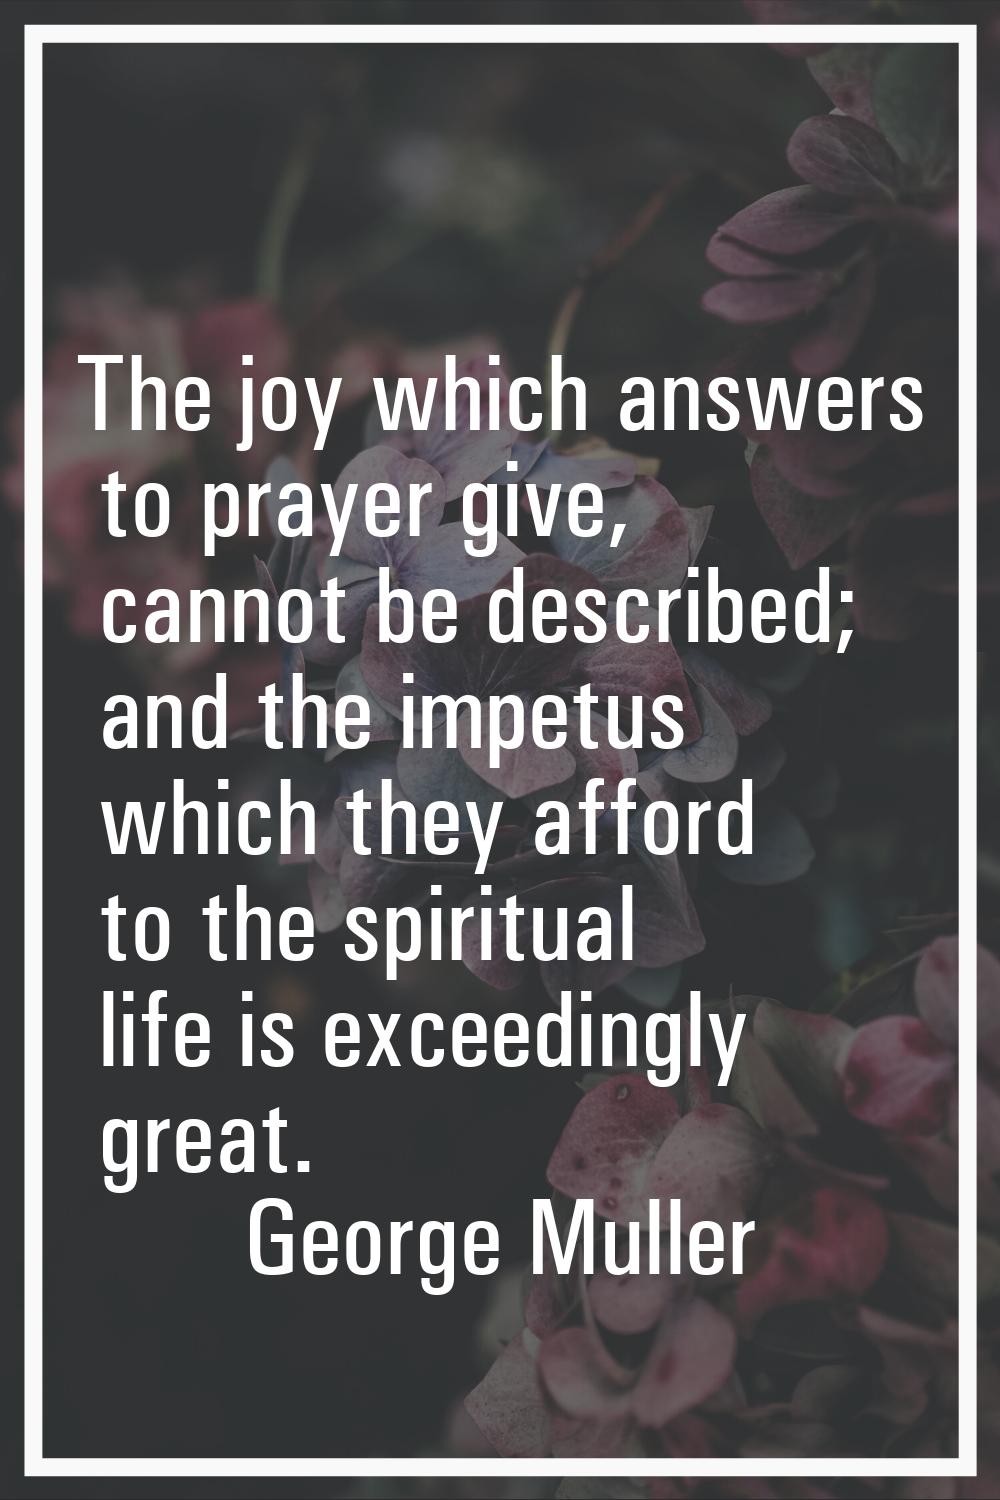 The joy which answers to prayer give, cannot be described; and the impetus which they afford to the